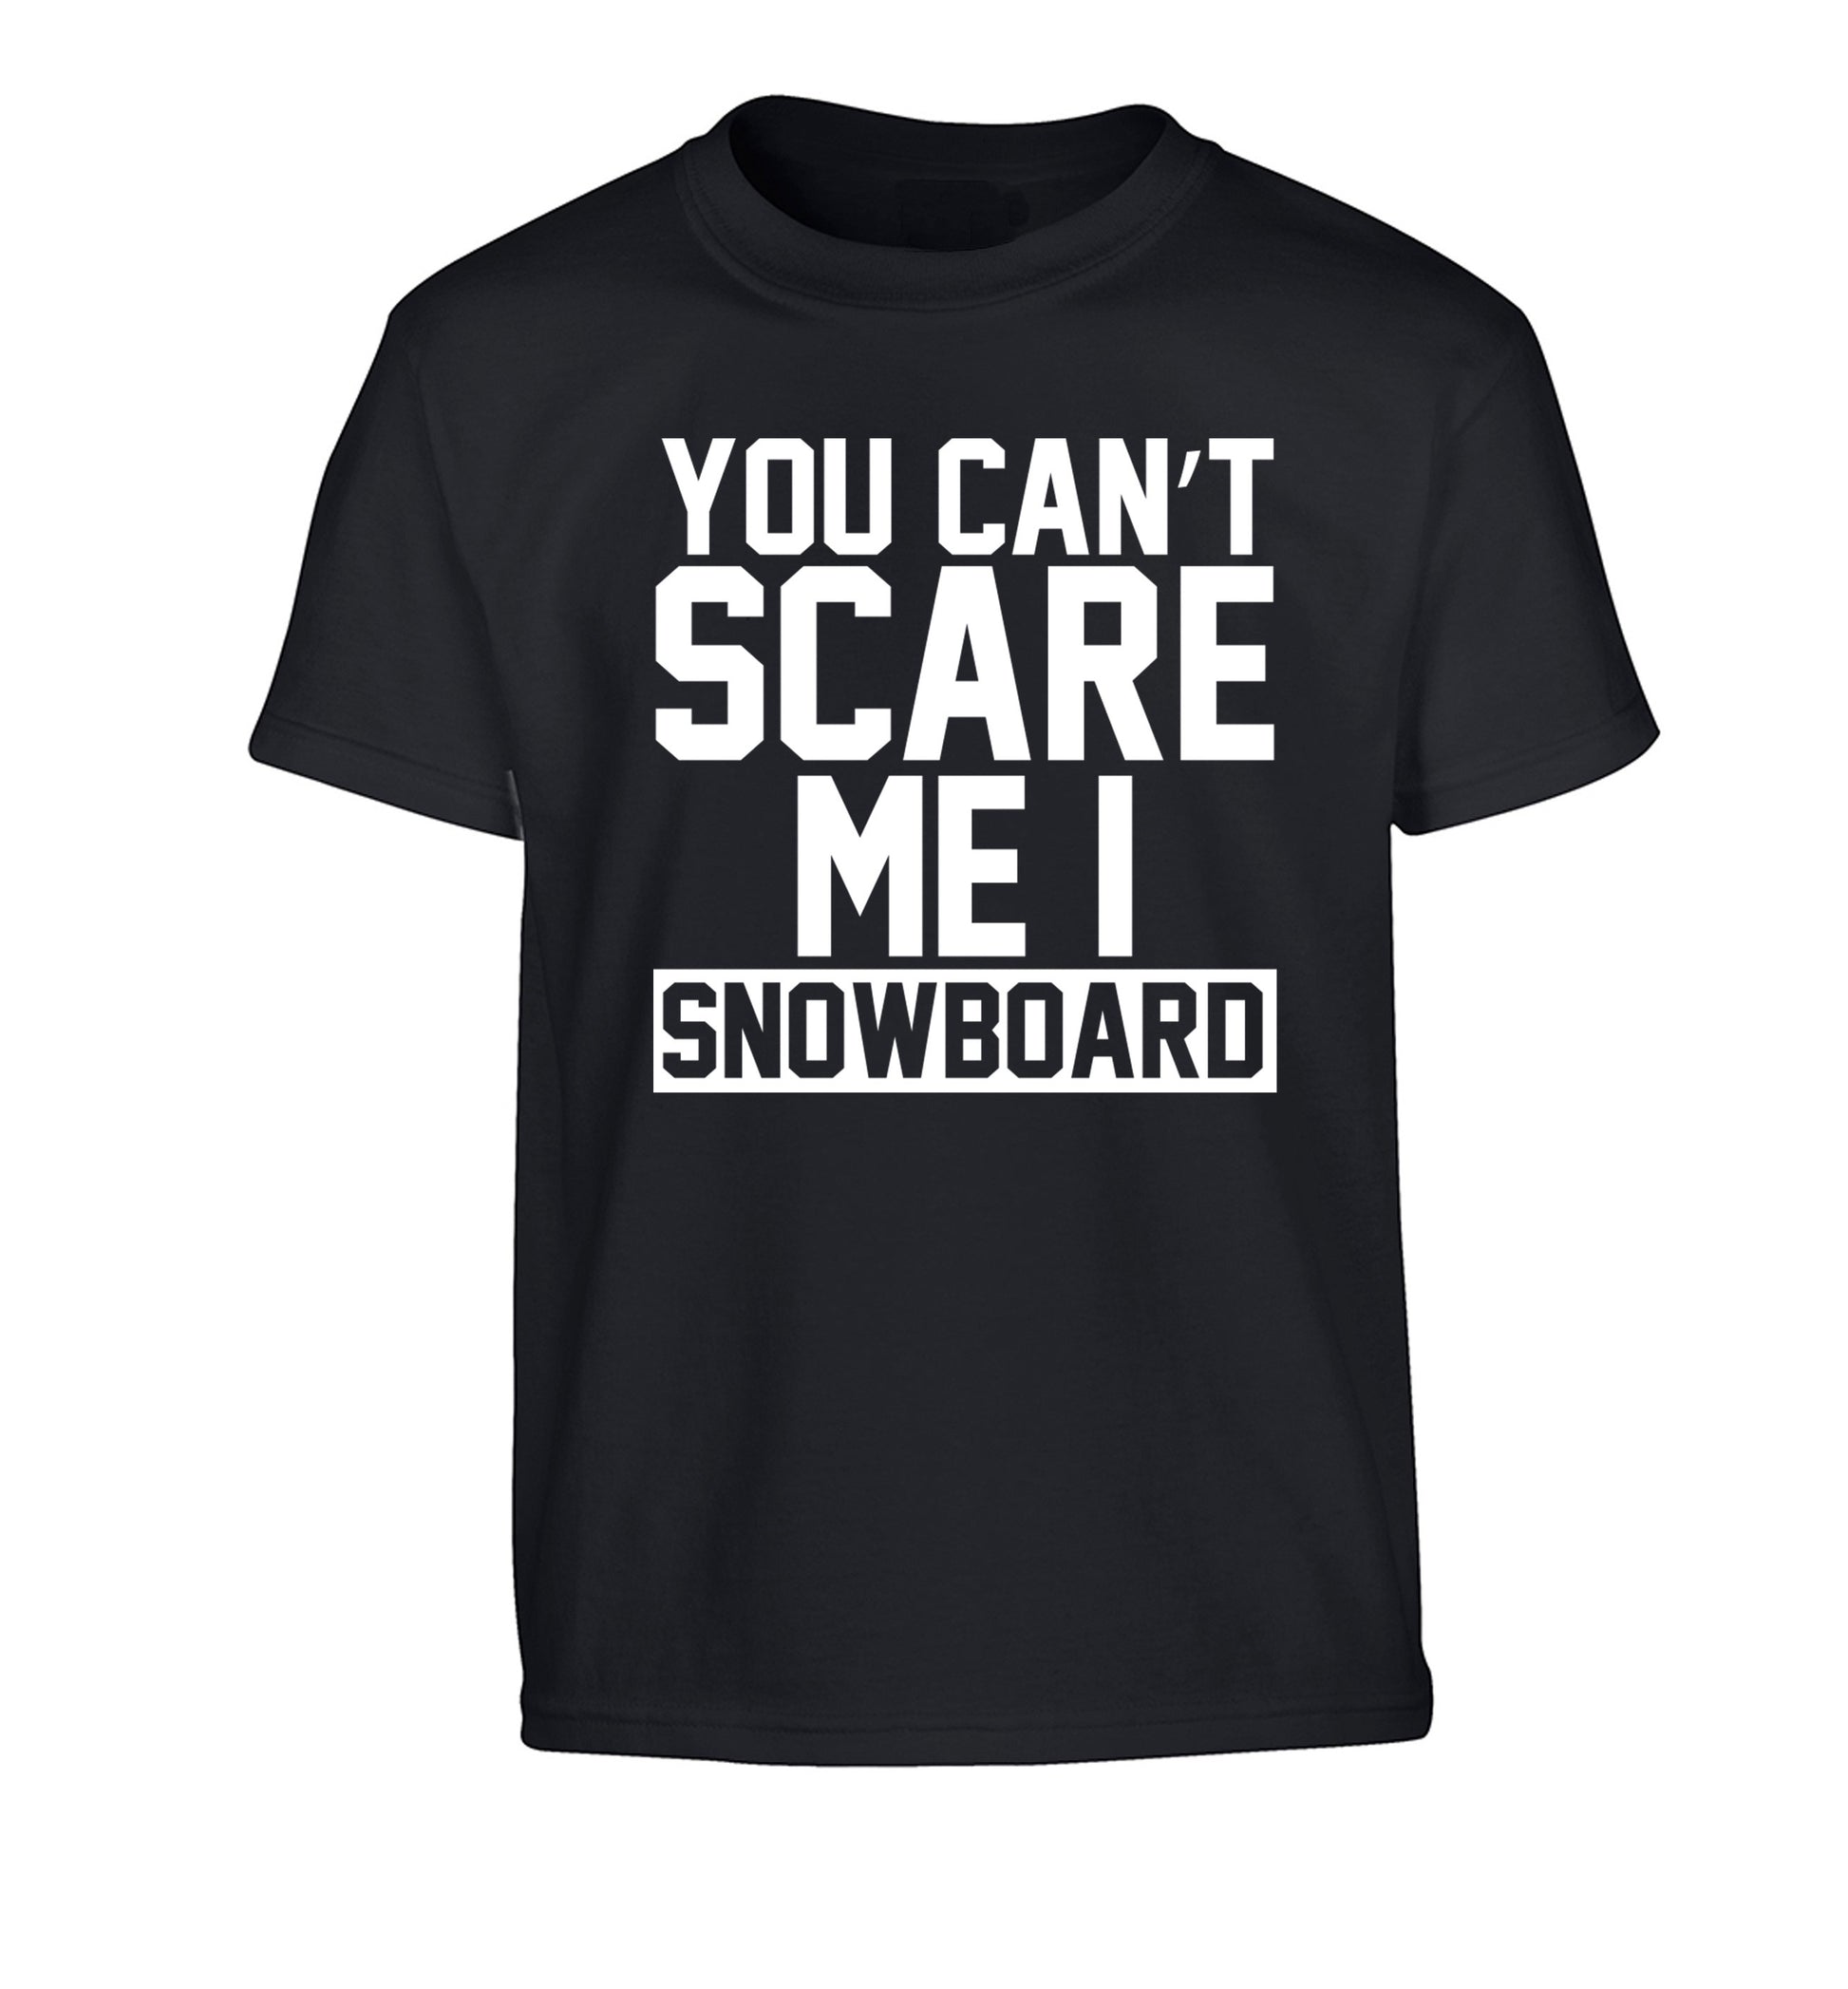 You can't scare me I snowboard Children's black Tshirt 12-14 Years